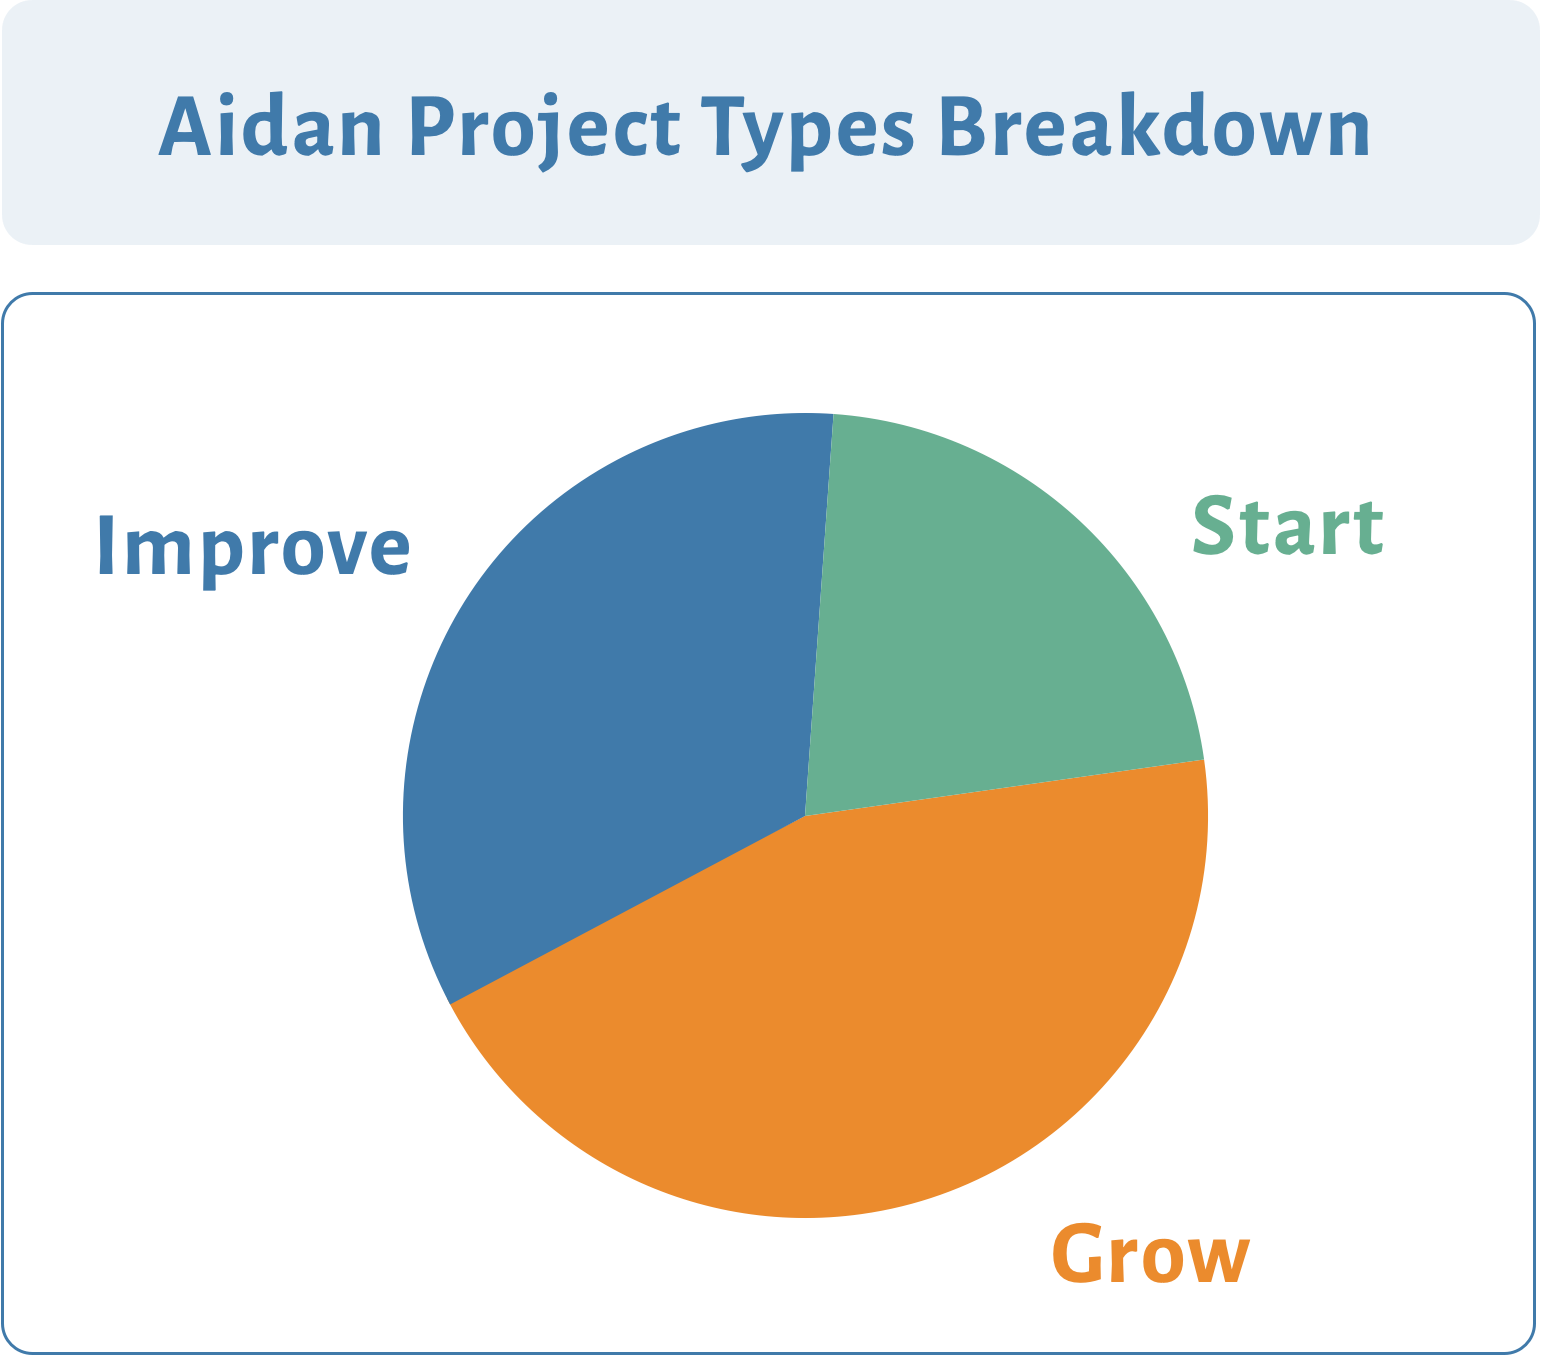 Proportions of different project types across with grow being the largest followed by improve and then start